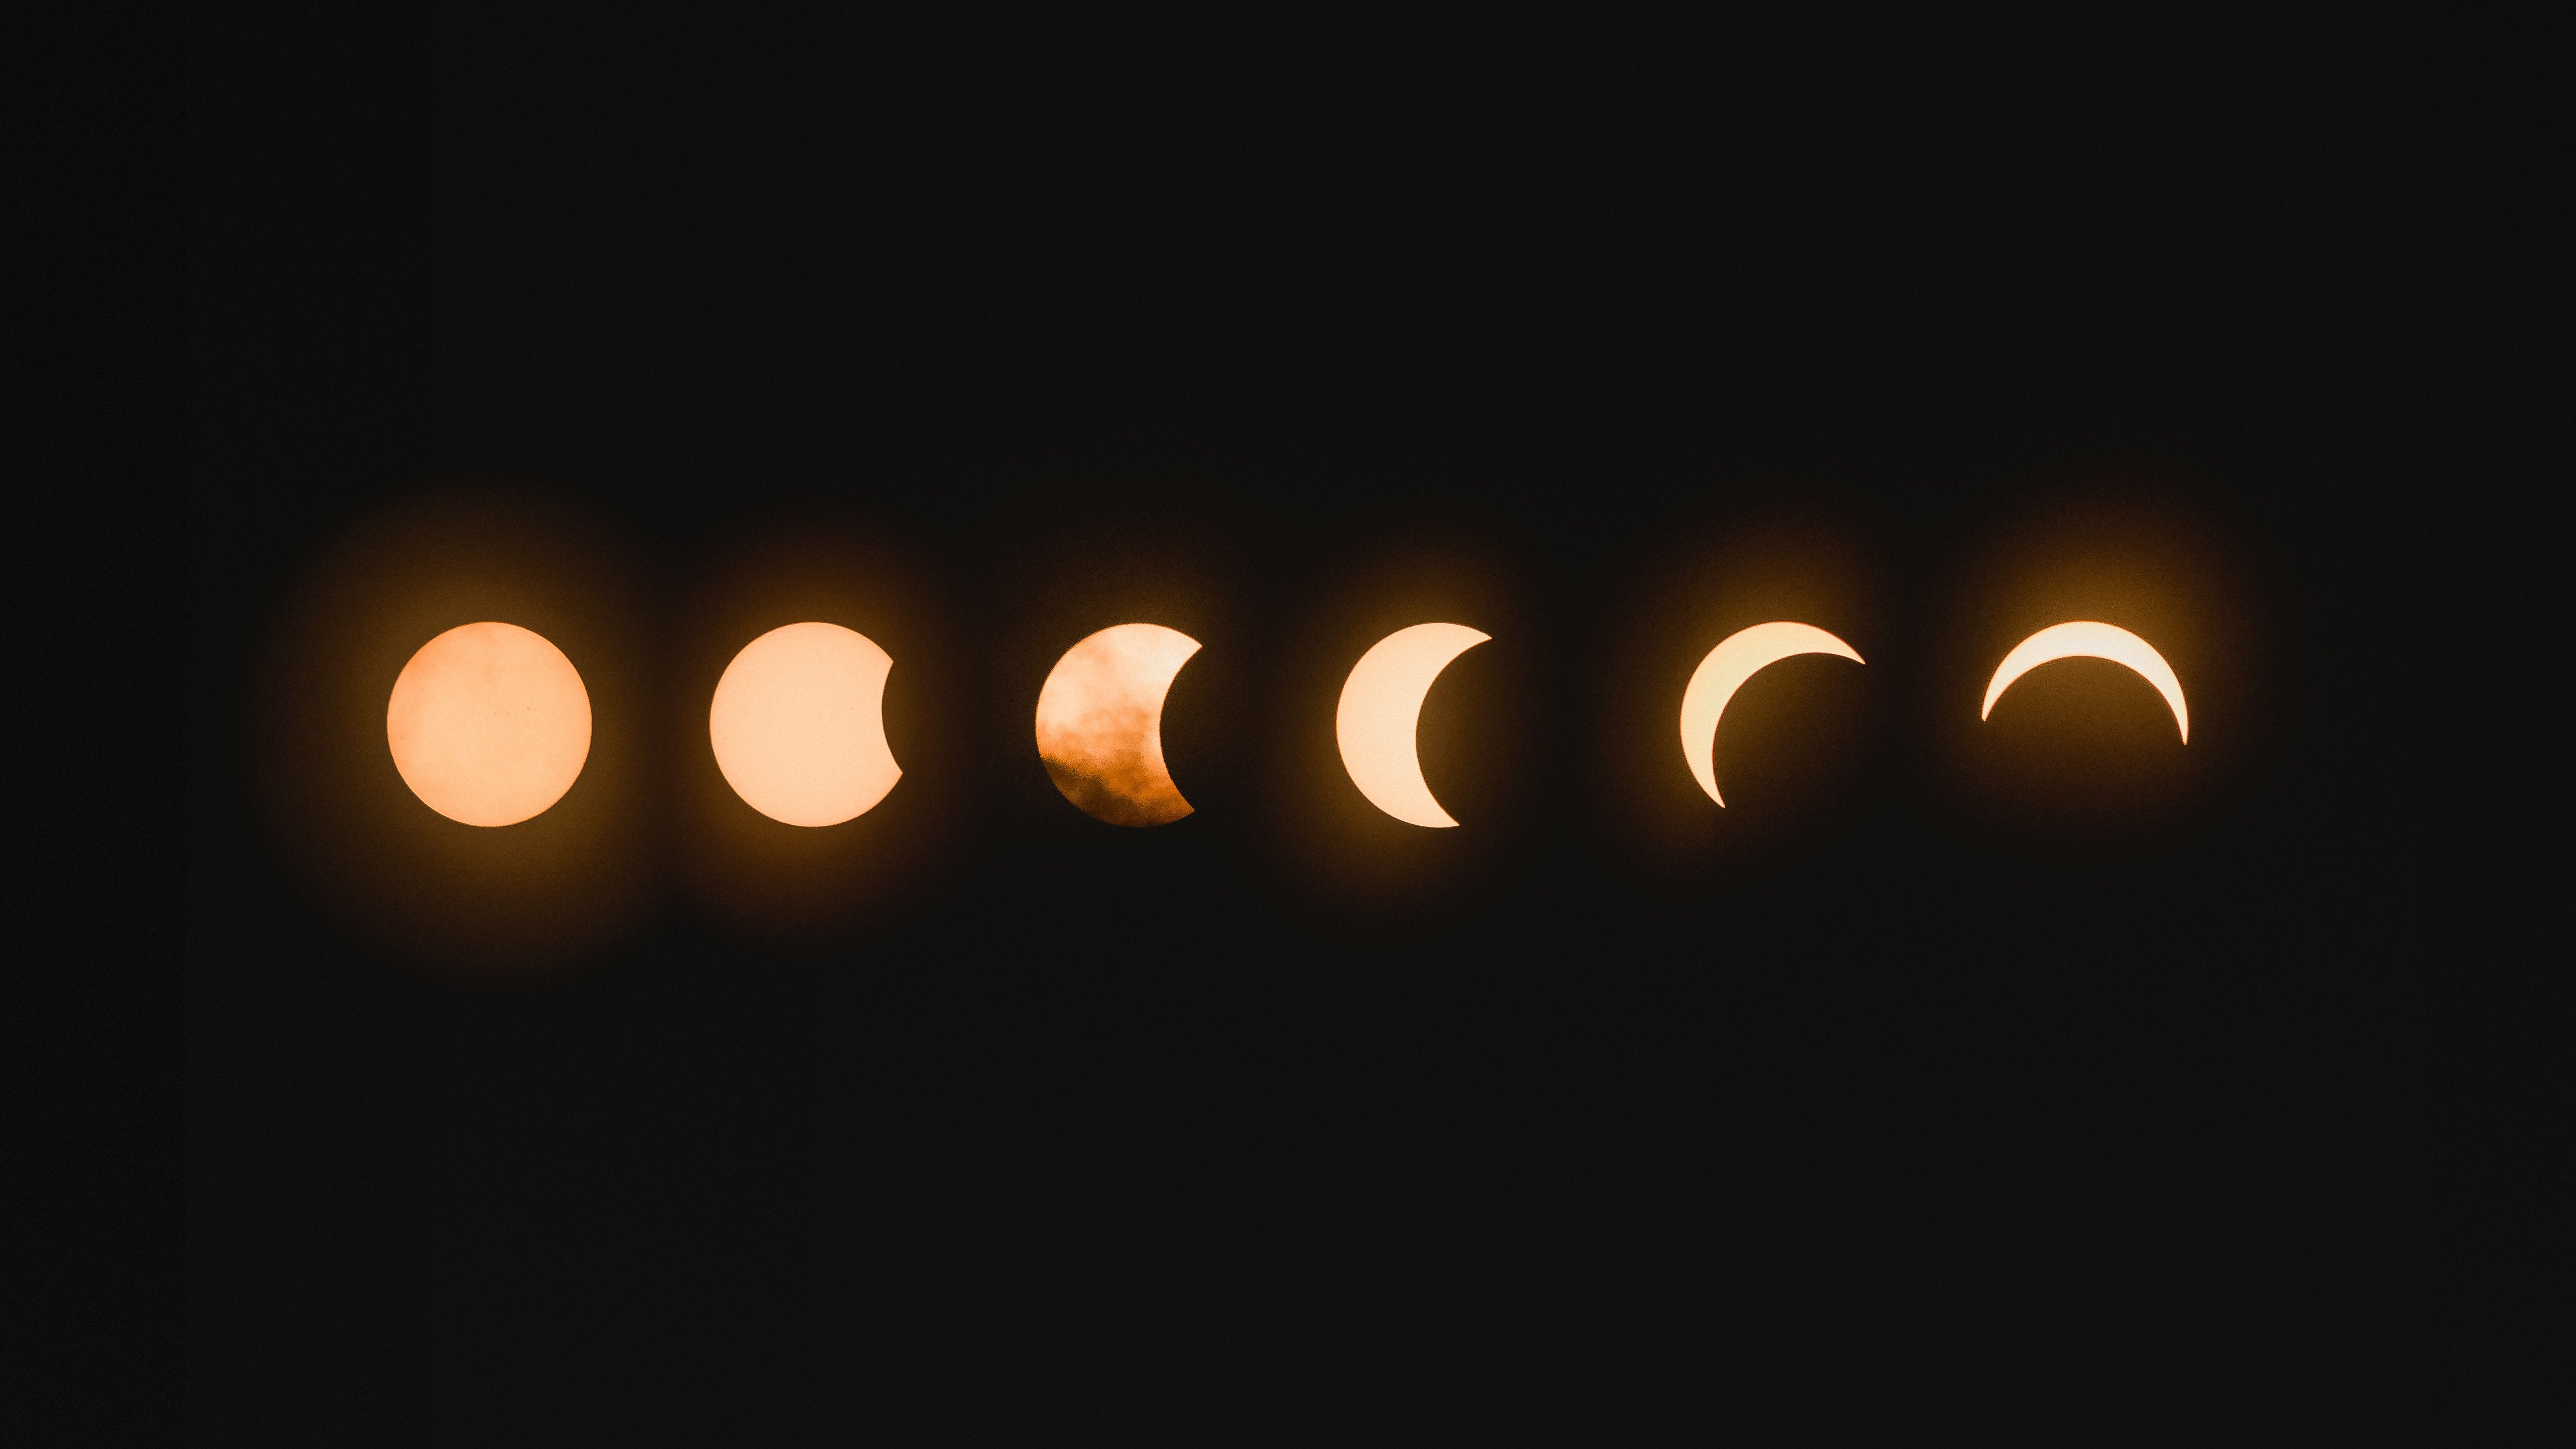 The phases of the moon in the night sky. - Moon phases, eclipse